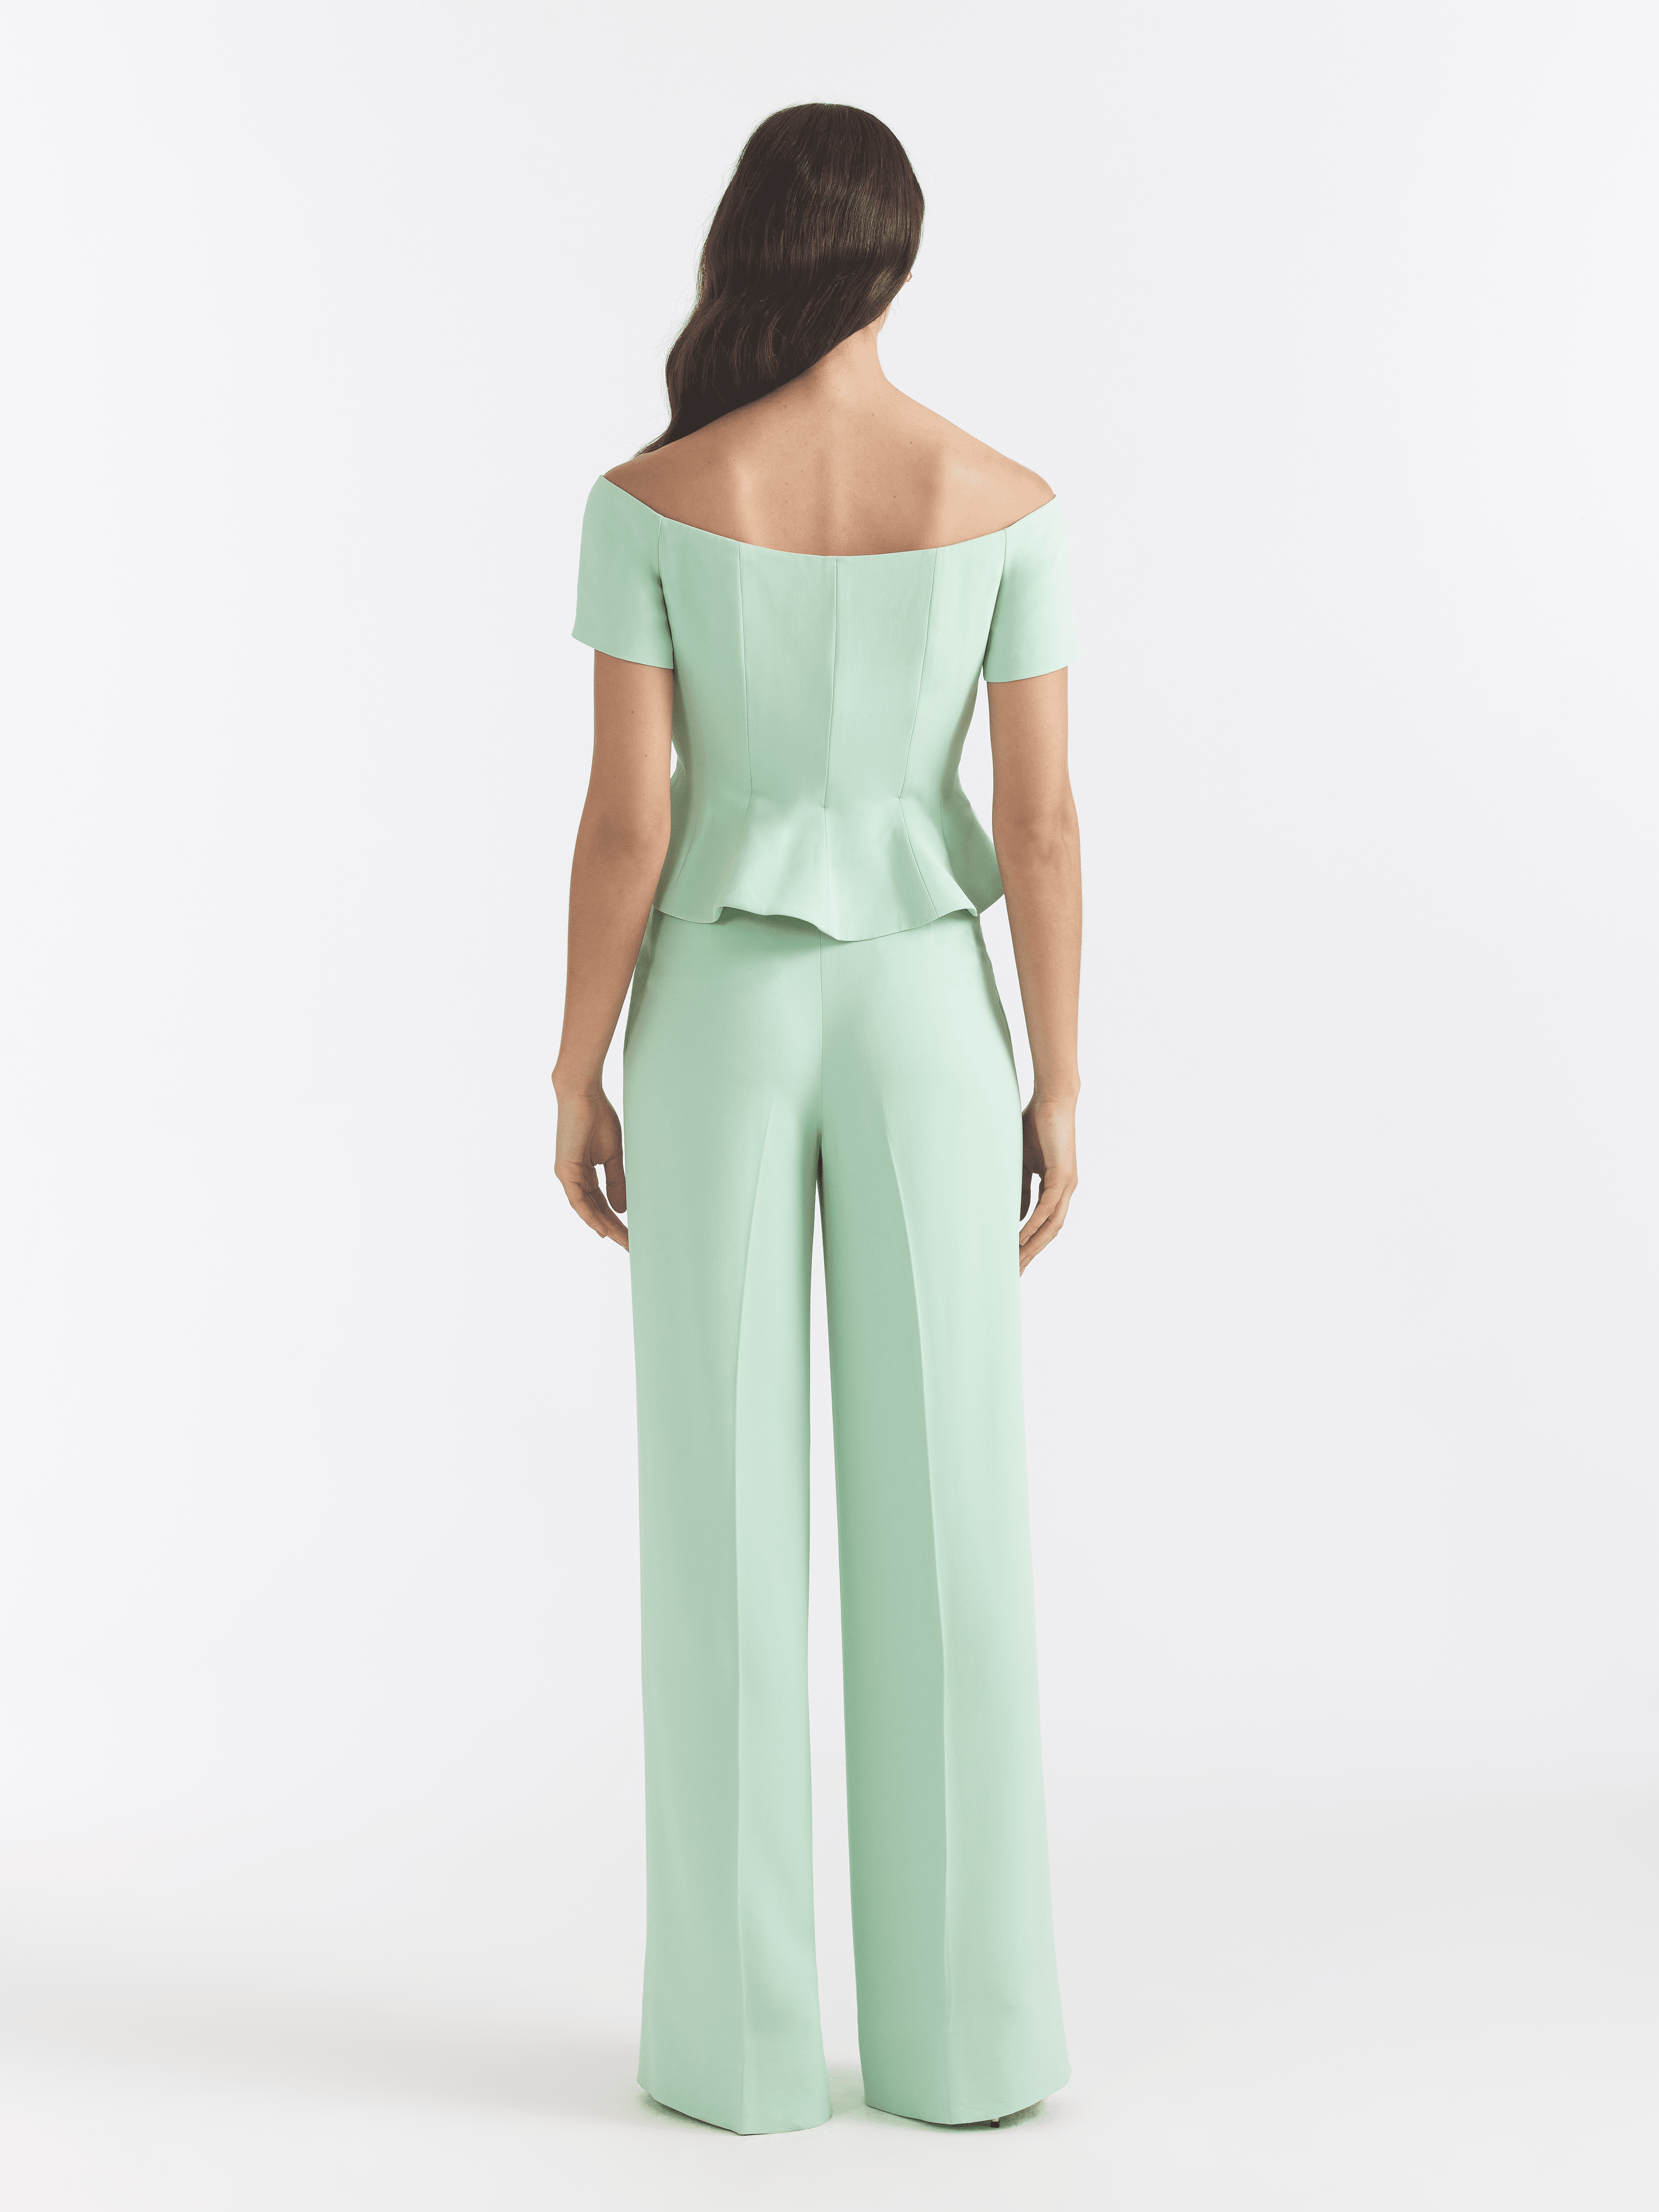 Clementine Top in Mint